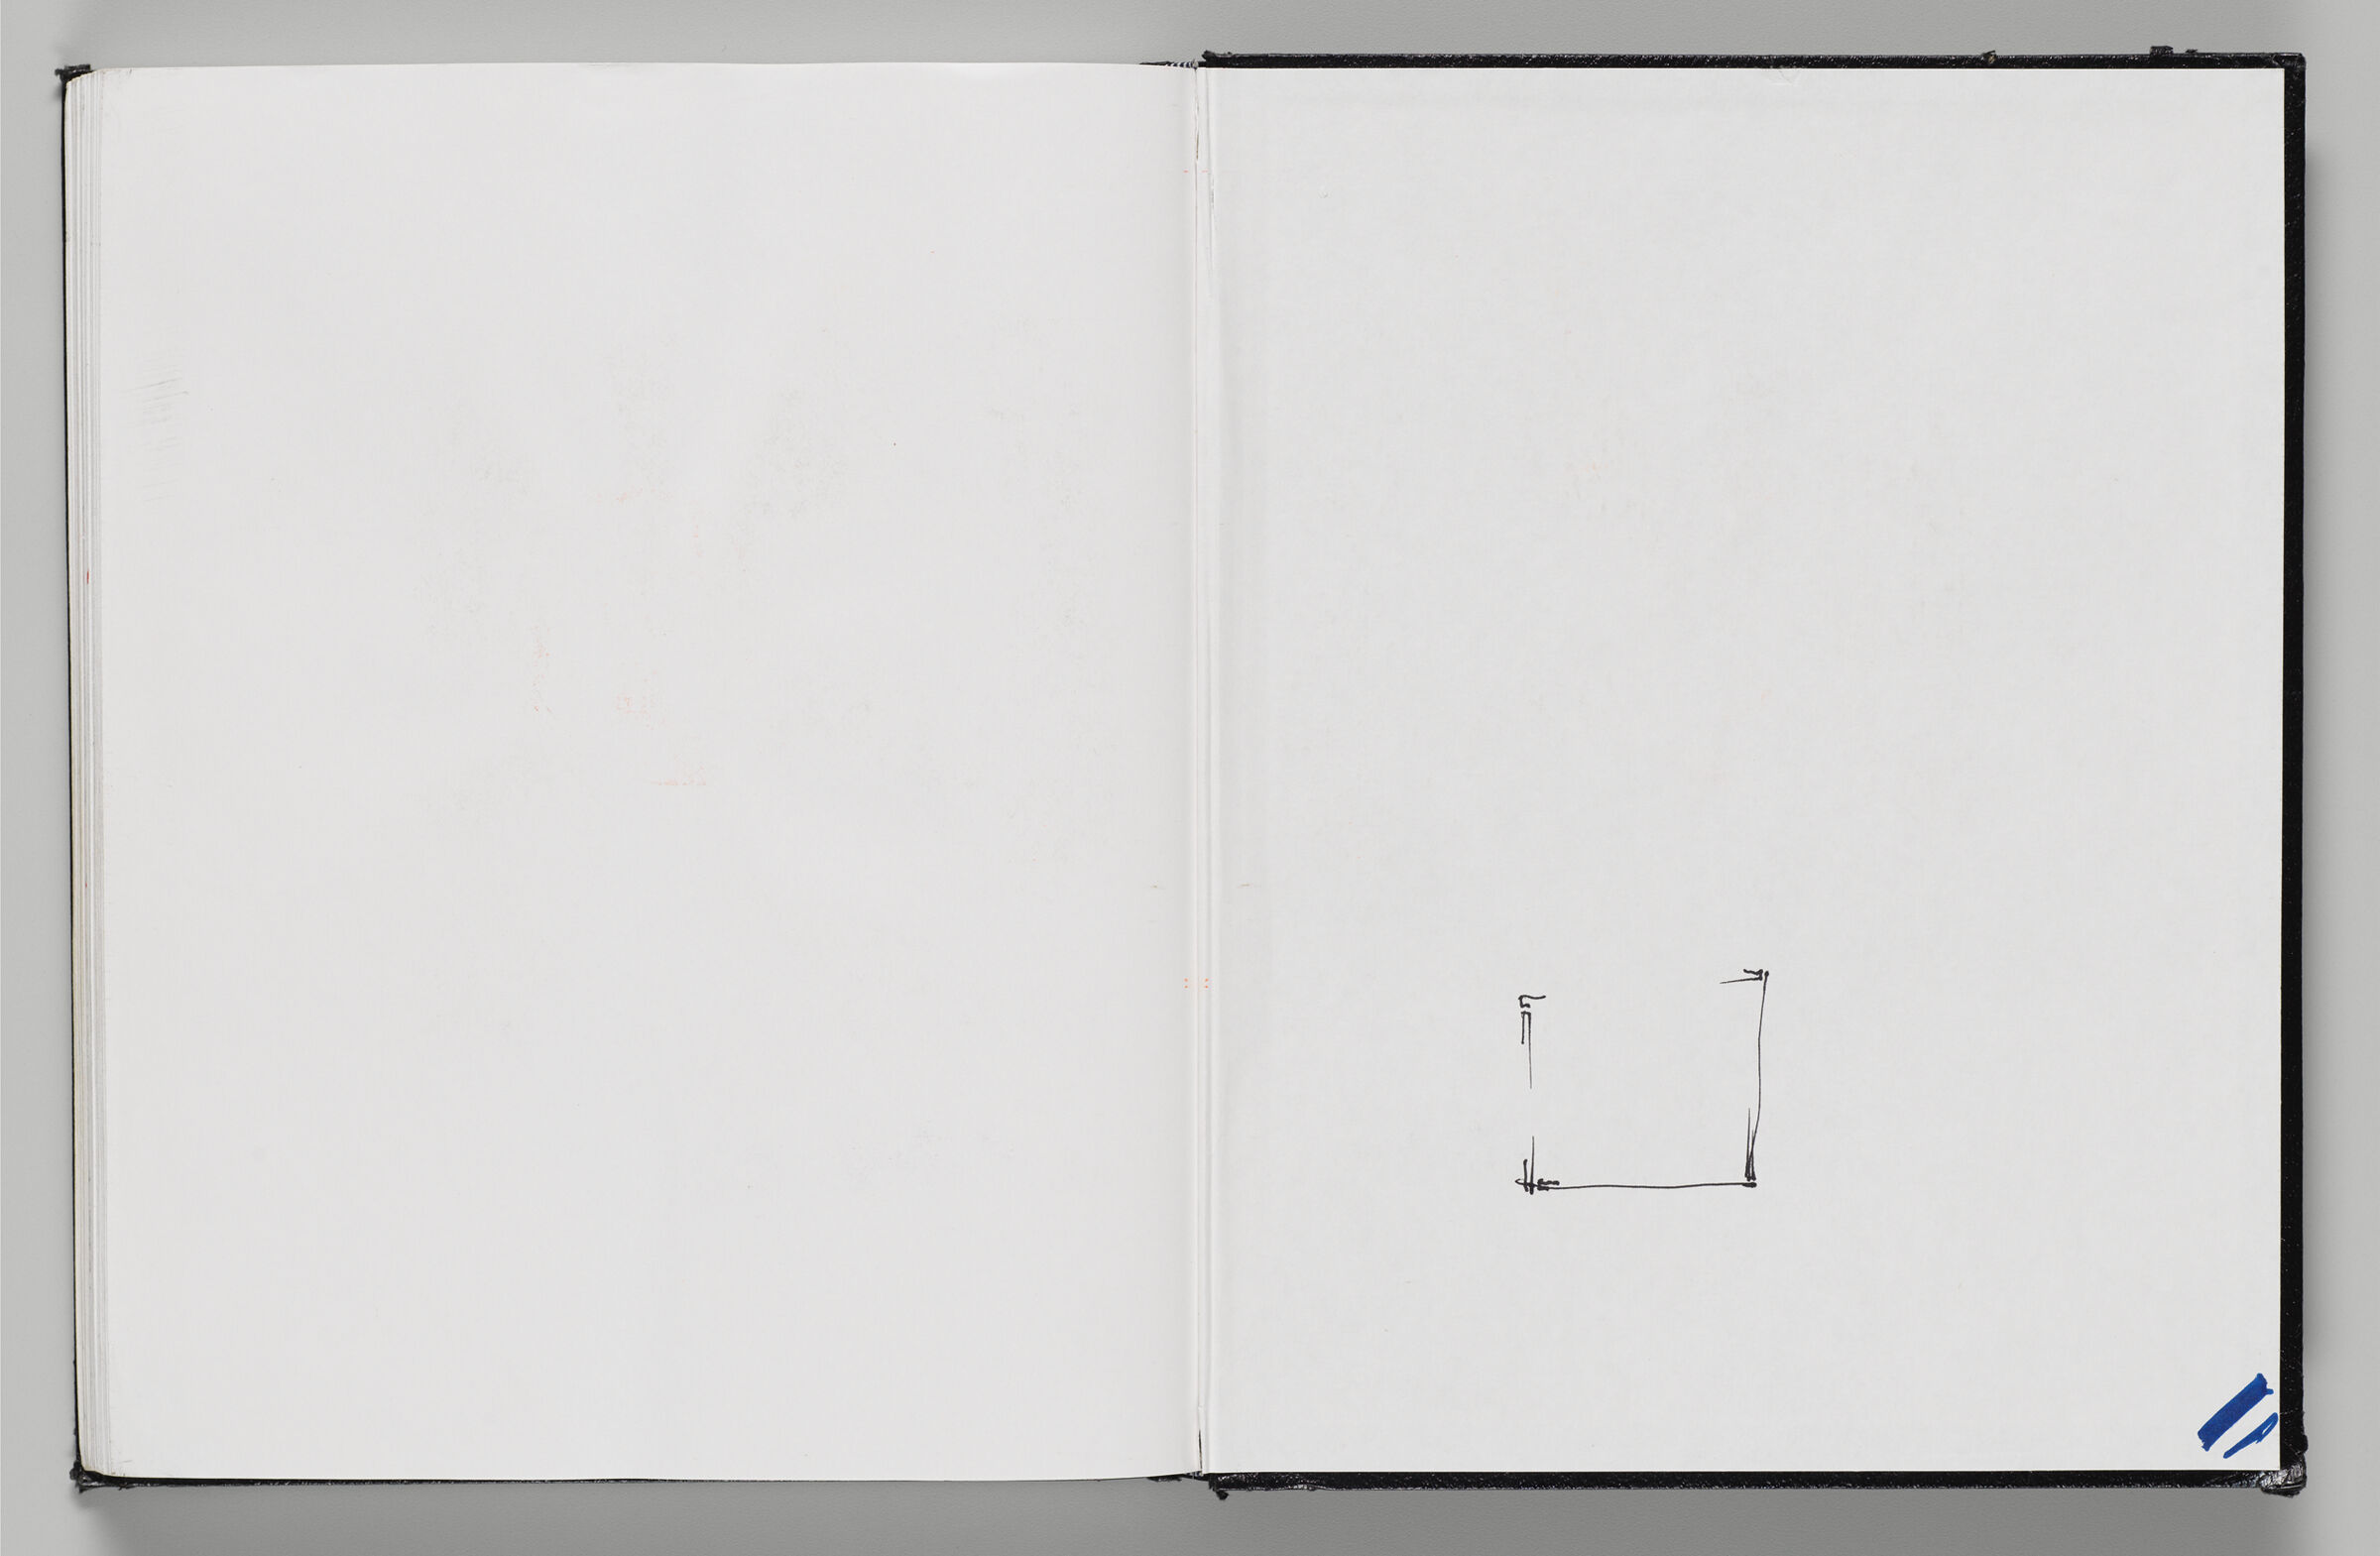 Untitled (Blank, Left Page); Untitled (Stray Mark And Small Rectangle, Right Page)
